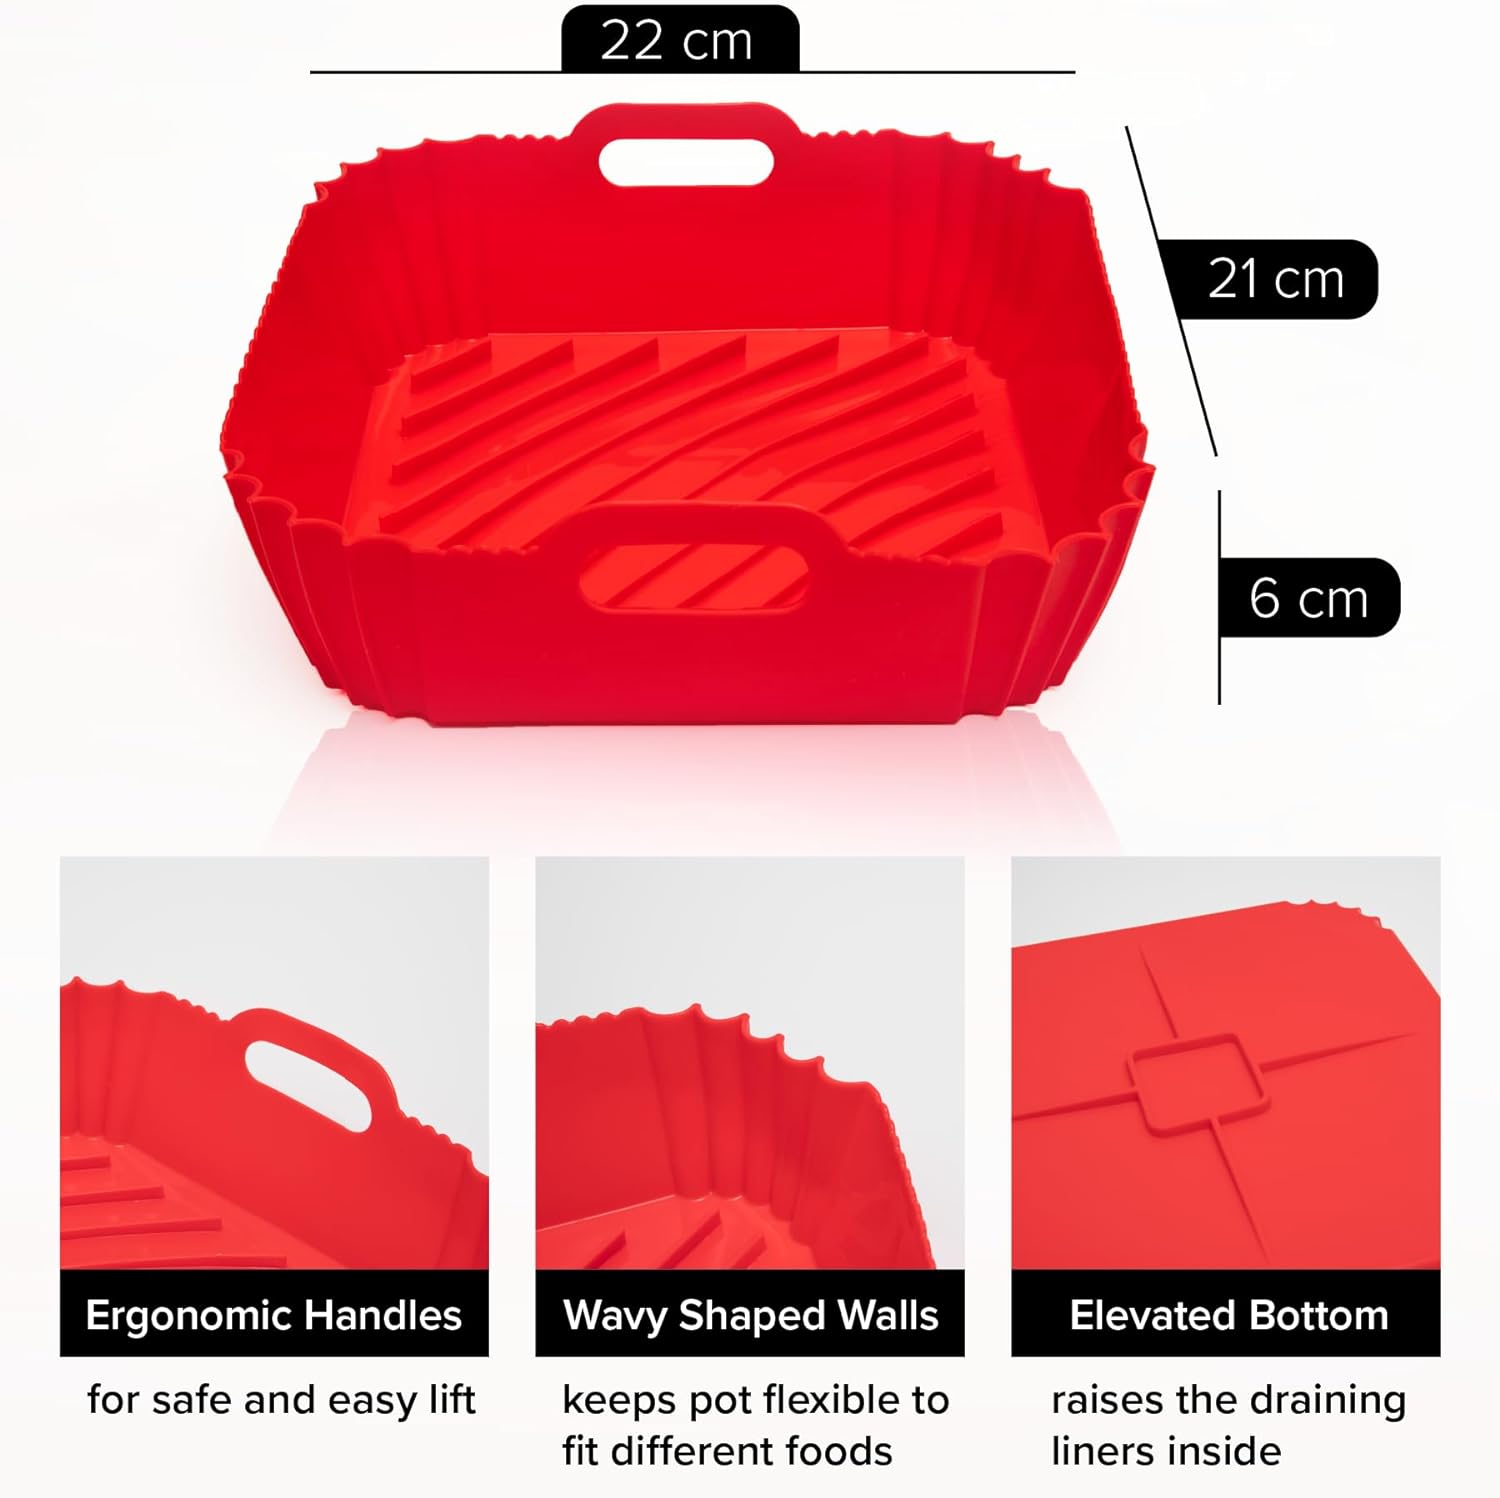 a red baking tray with measurements with text: '22 cm 21 cm 6 cm Ergonomic Handles Wavy Shaped Walls Elevated Bottom for safe and easy lift keeps pot flexible to raises the draining fit different foods liners inside'